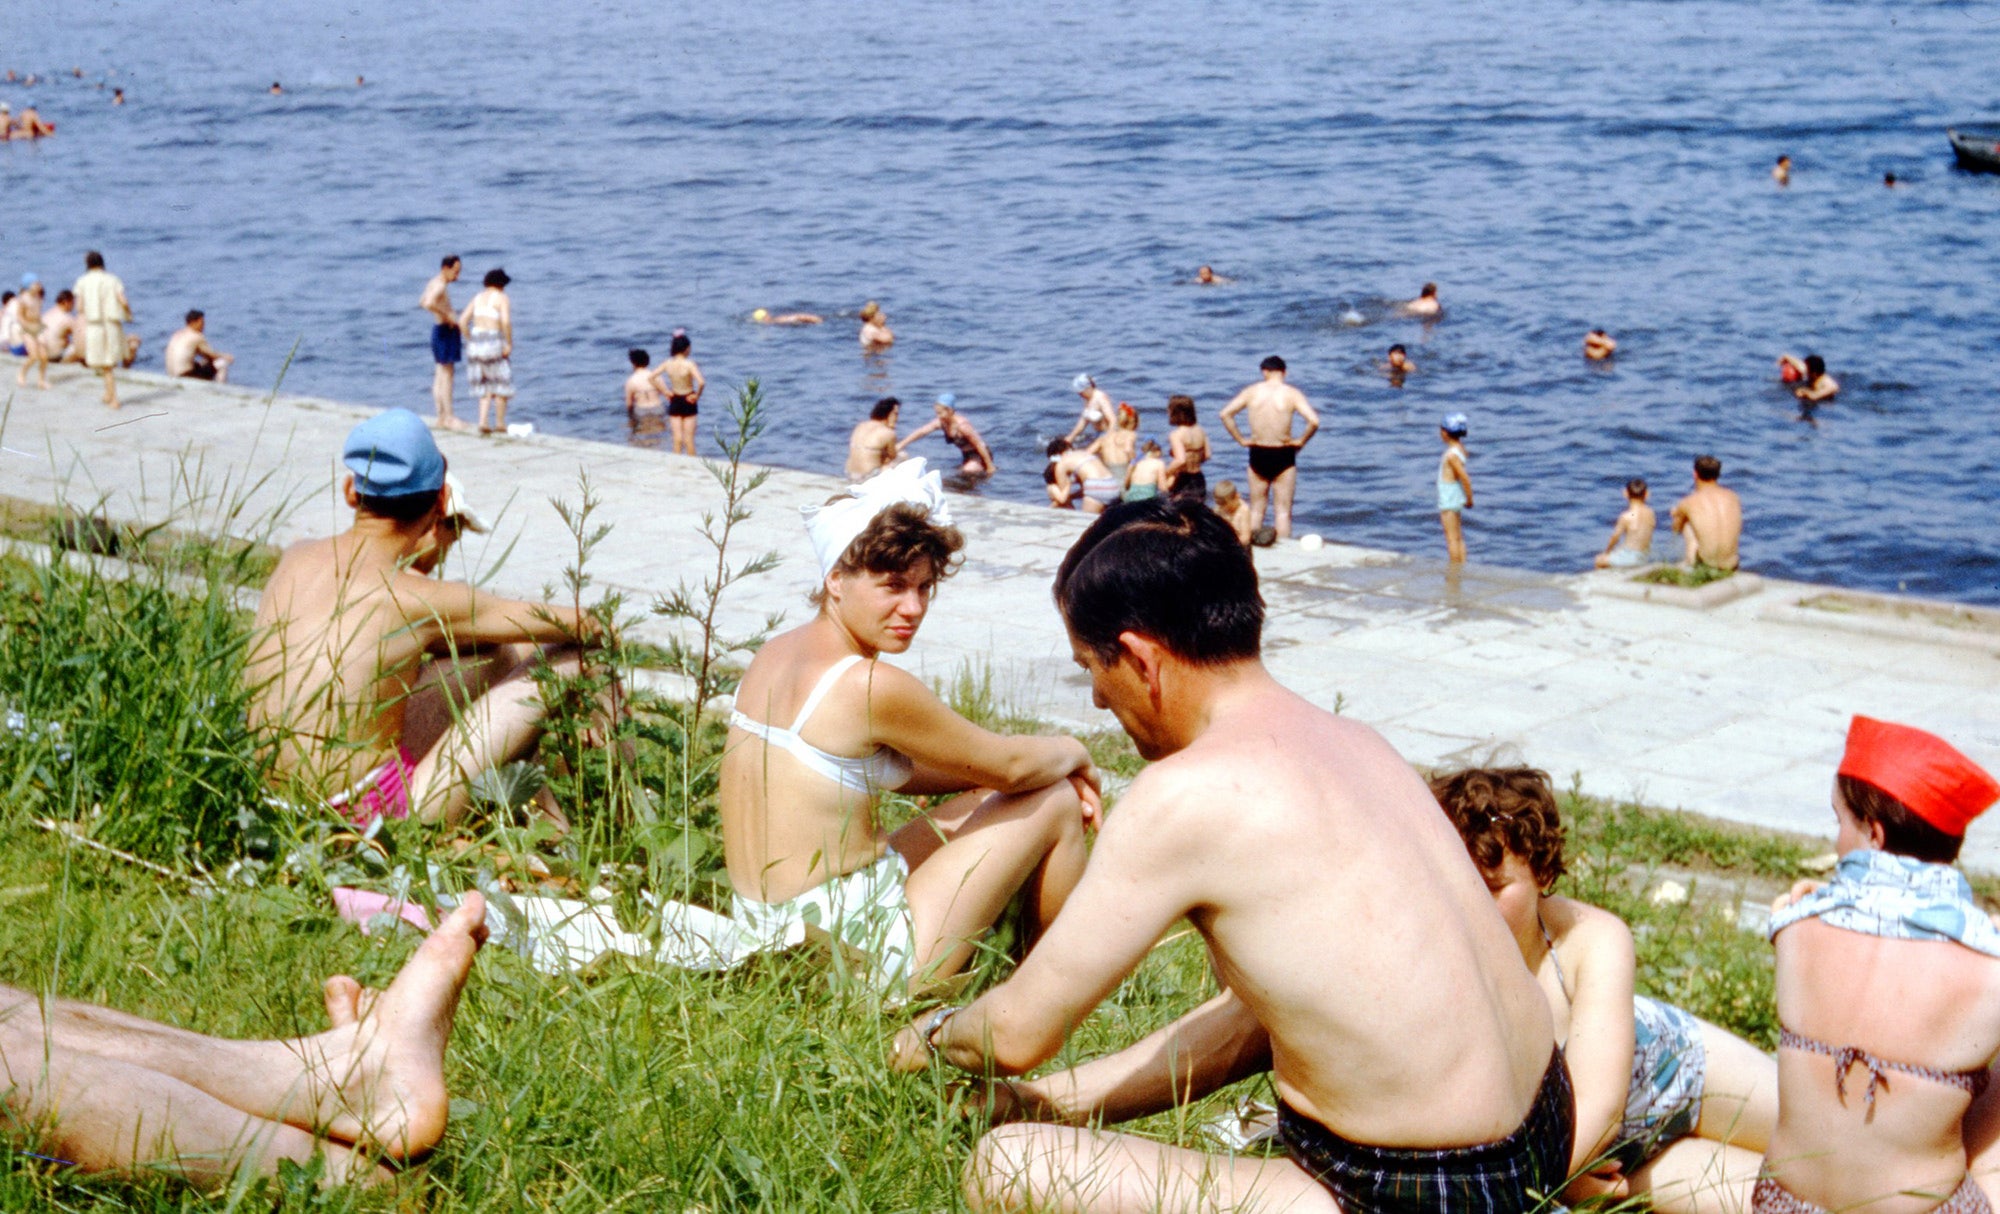 People relaxing on the beach along the Moskva River in Moscow, Russia in 1972